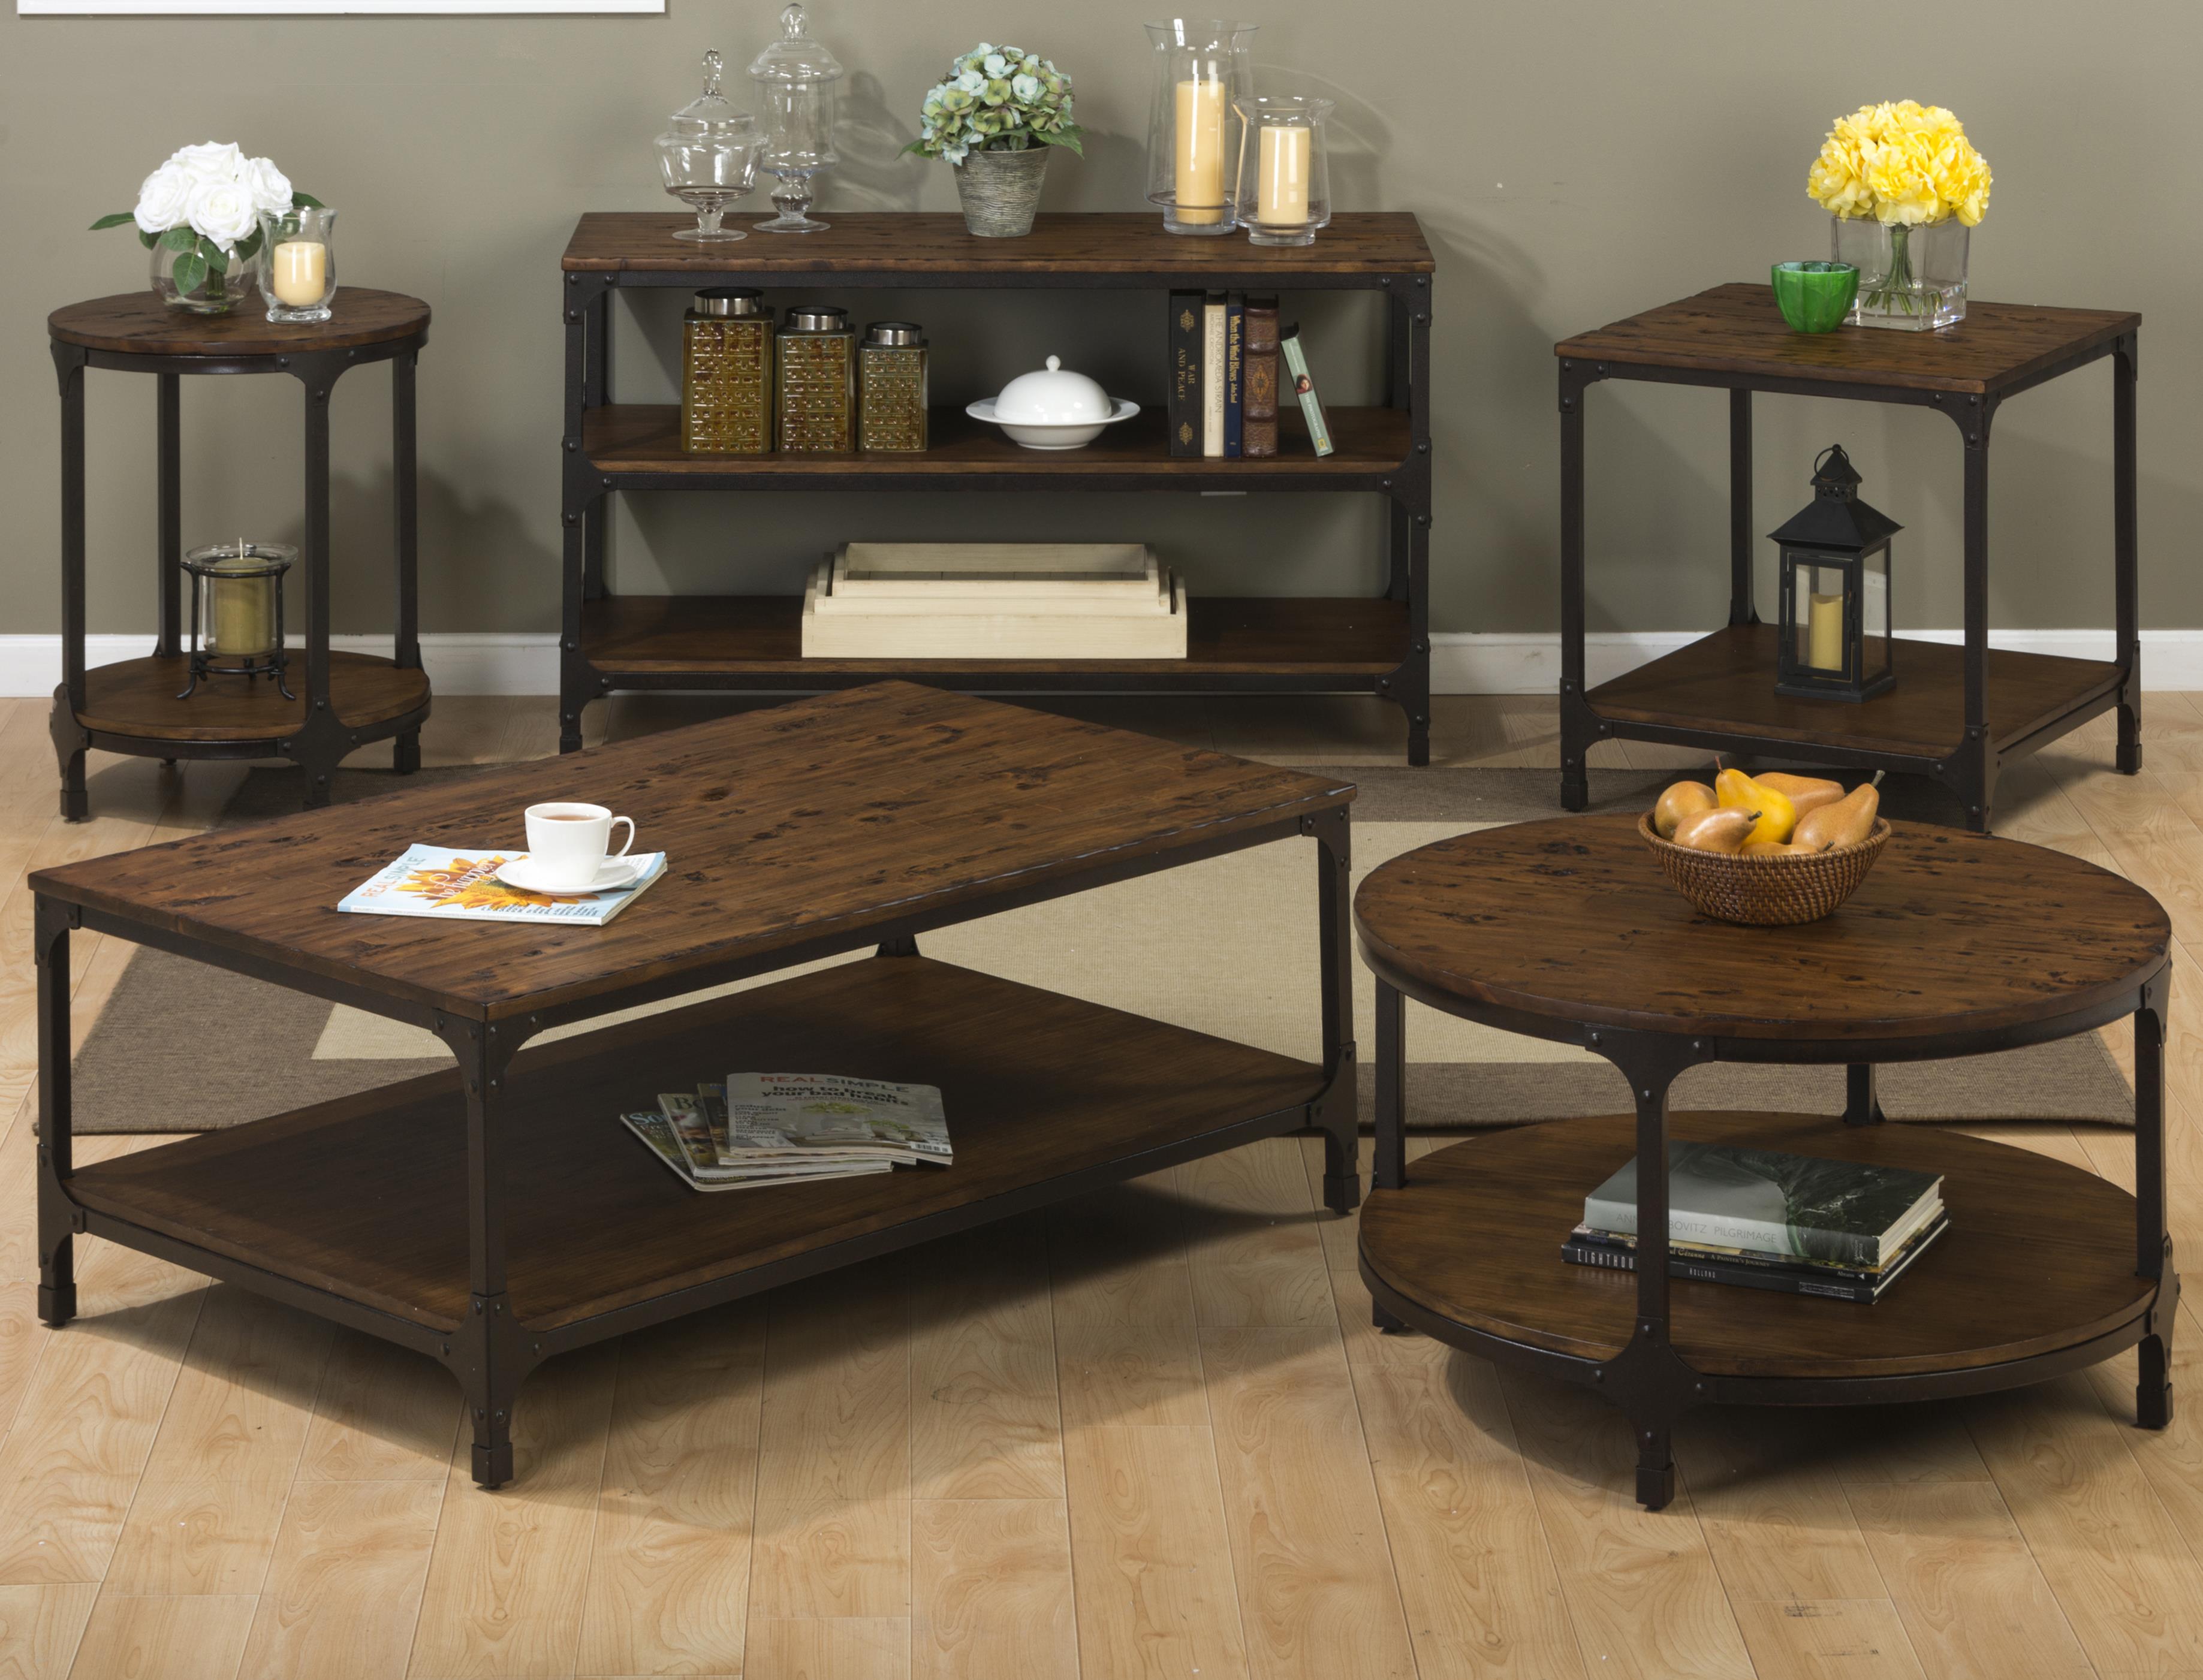 Urban Nature Square End Table-Quantity:1 - image 3 of 3